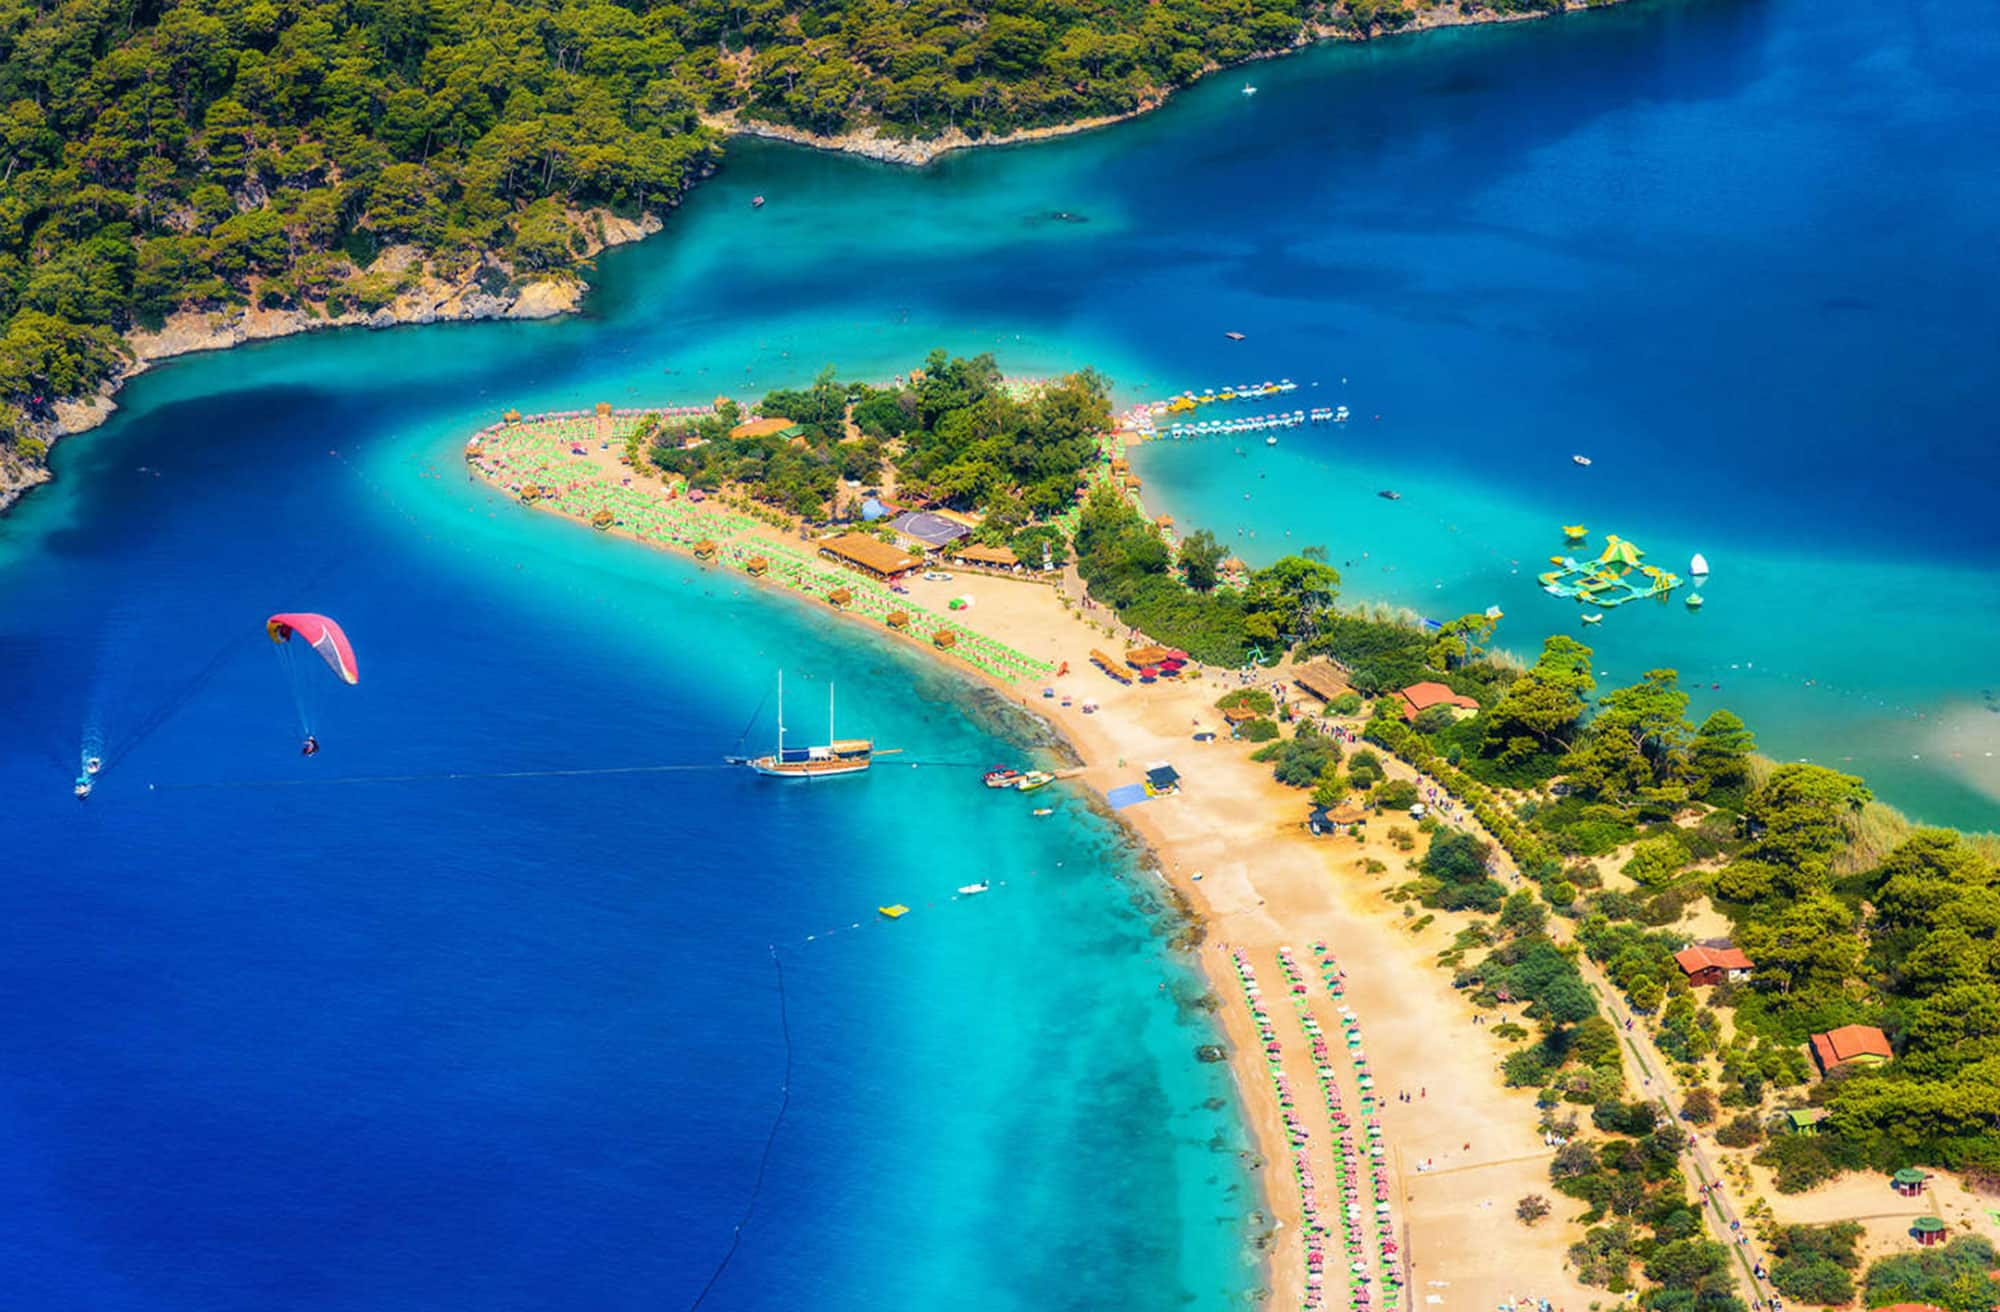 Top things to do in Fethiye